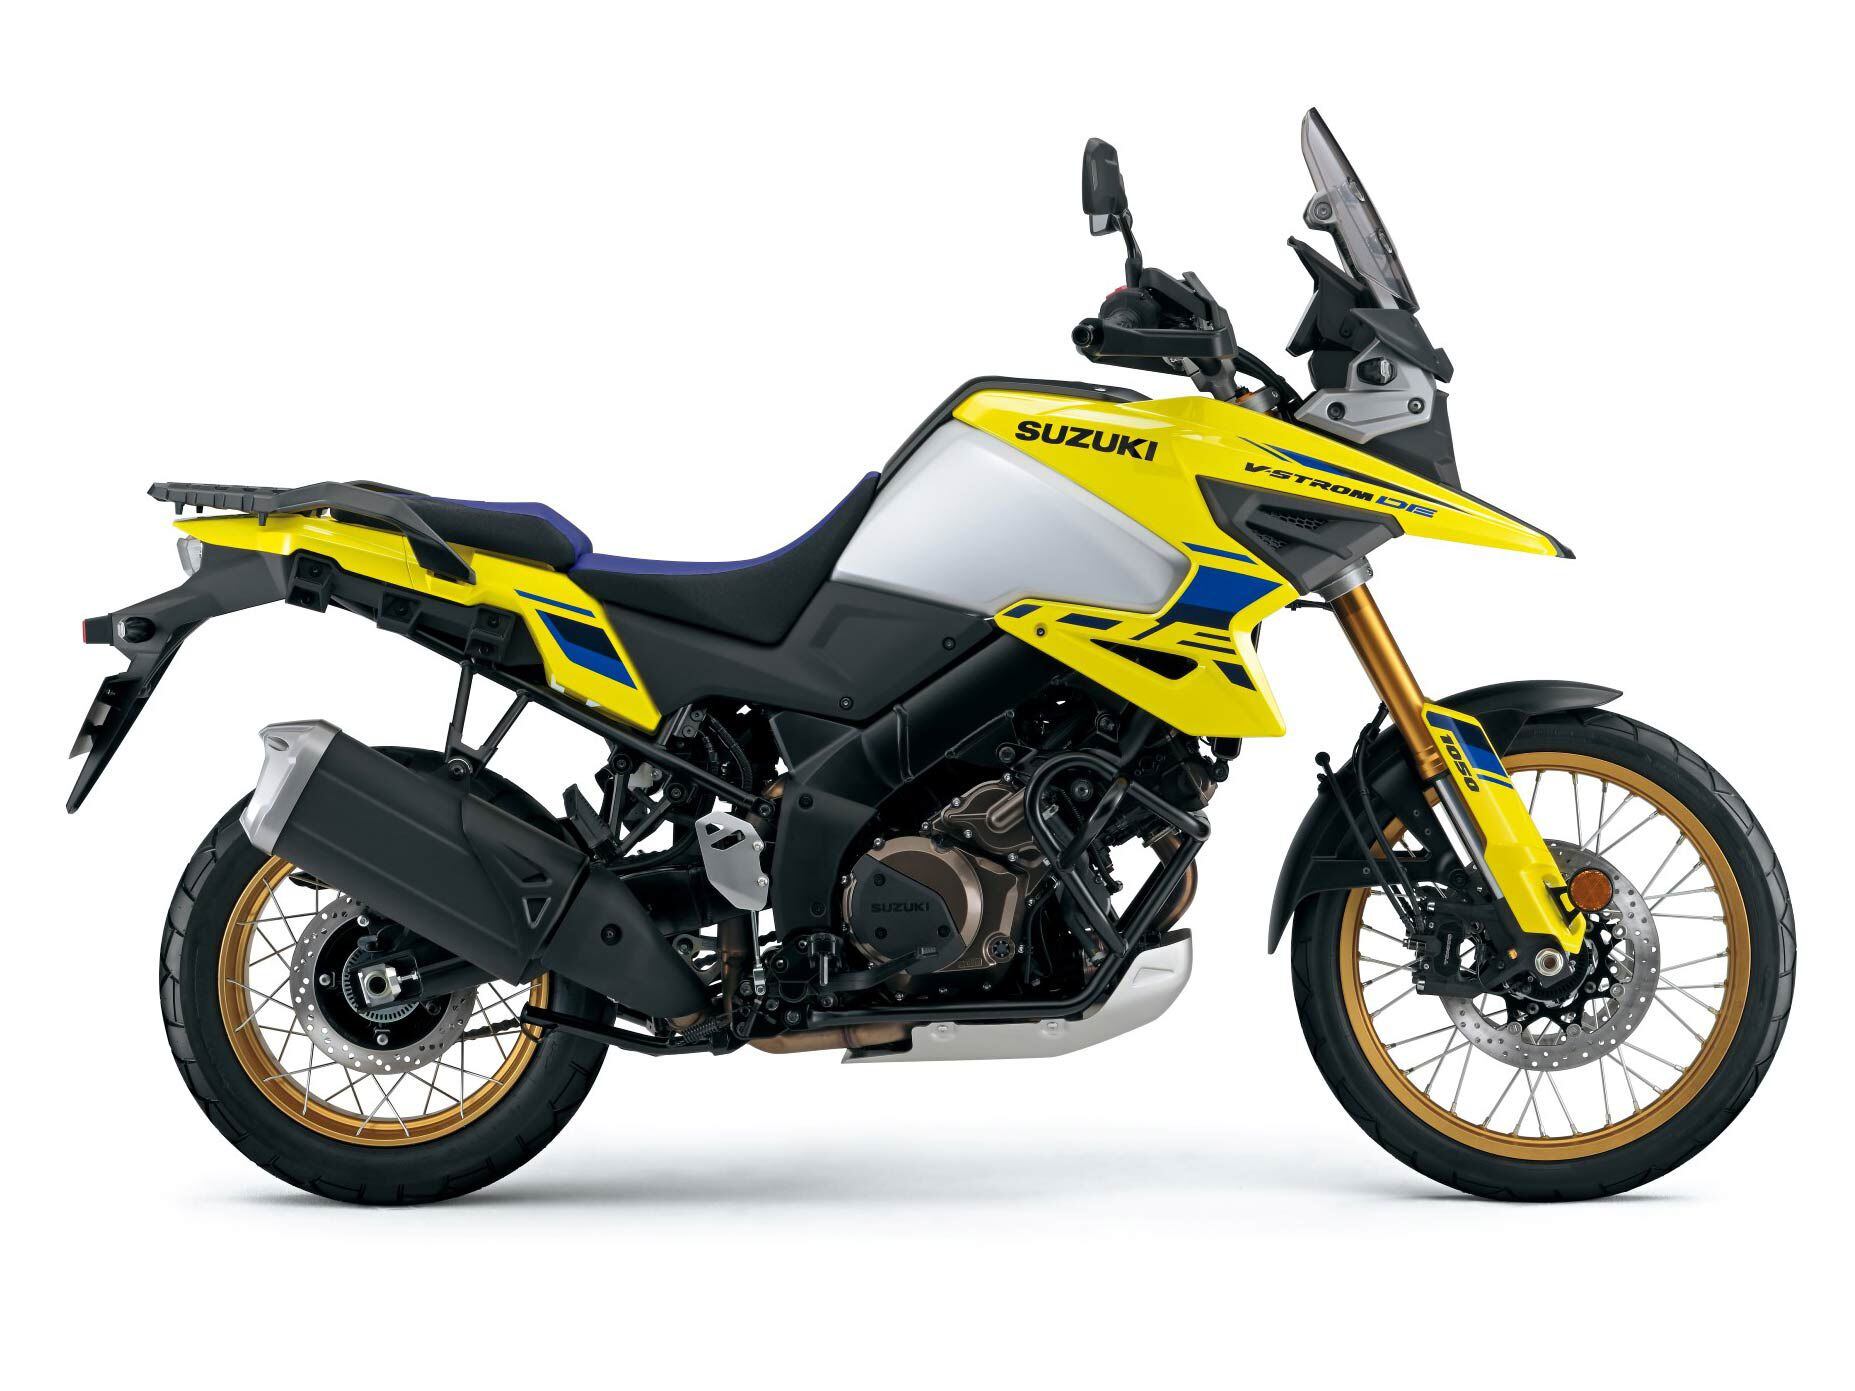 Suzuki’s V-Strom 1050DE gets updates to make it more off-road worthy including updated chassis and a 21-inch front wheel.